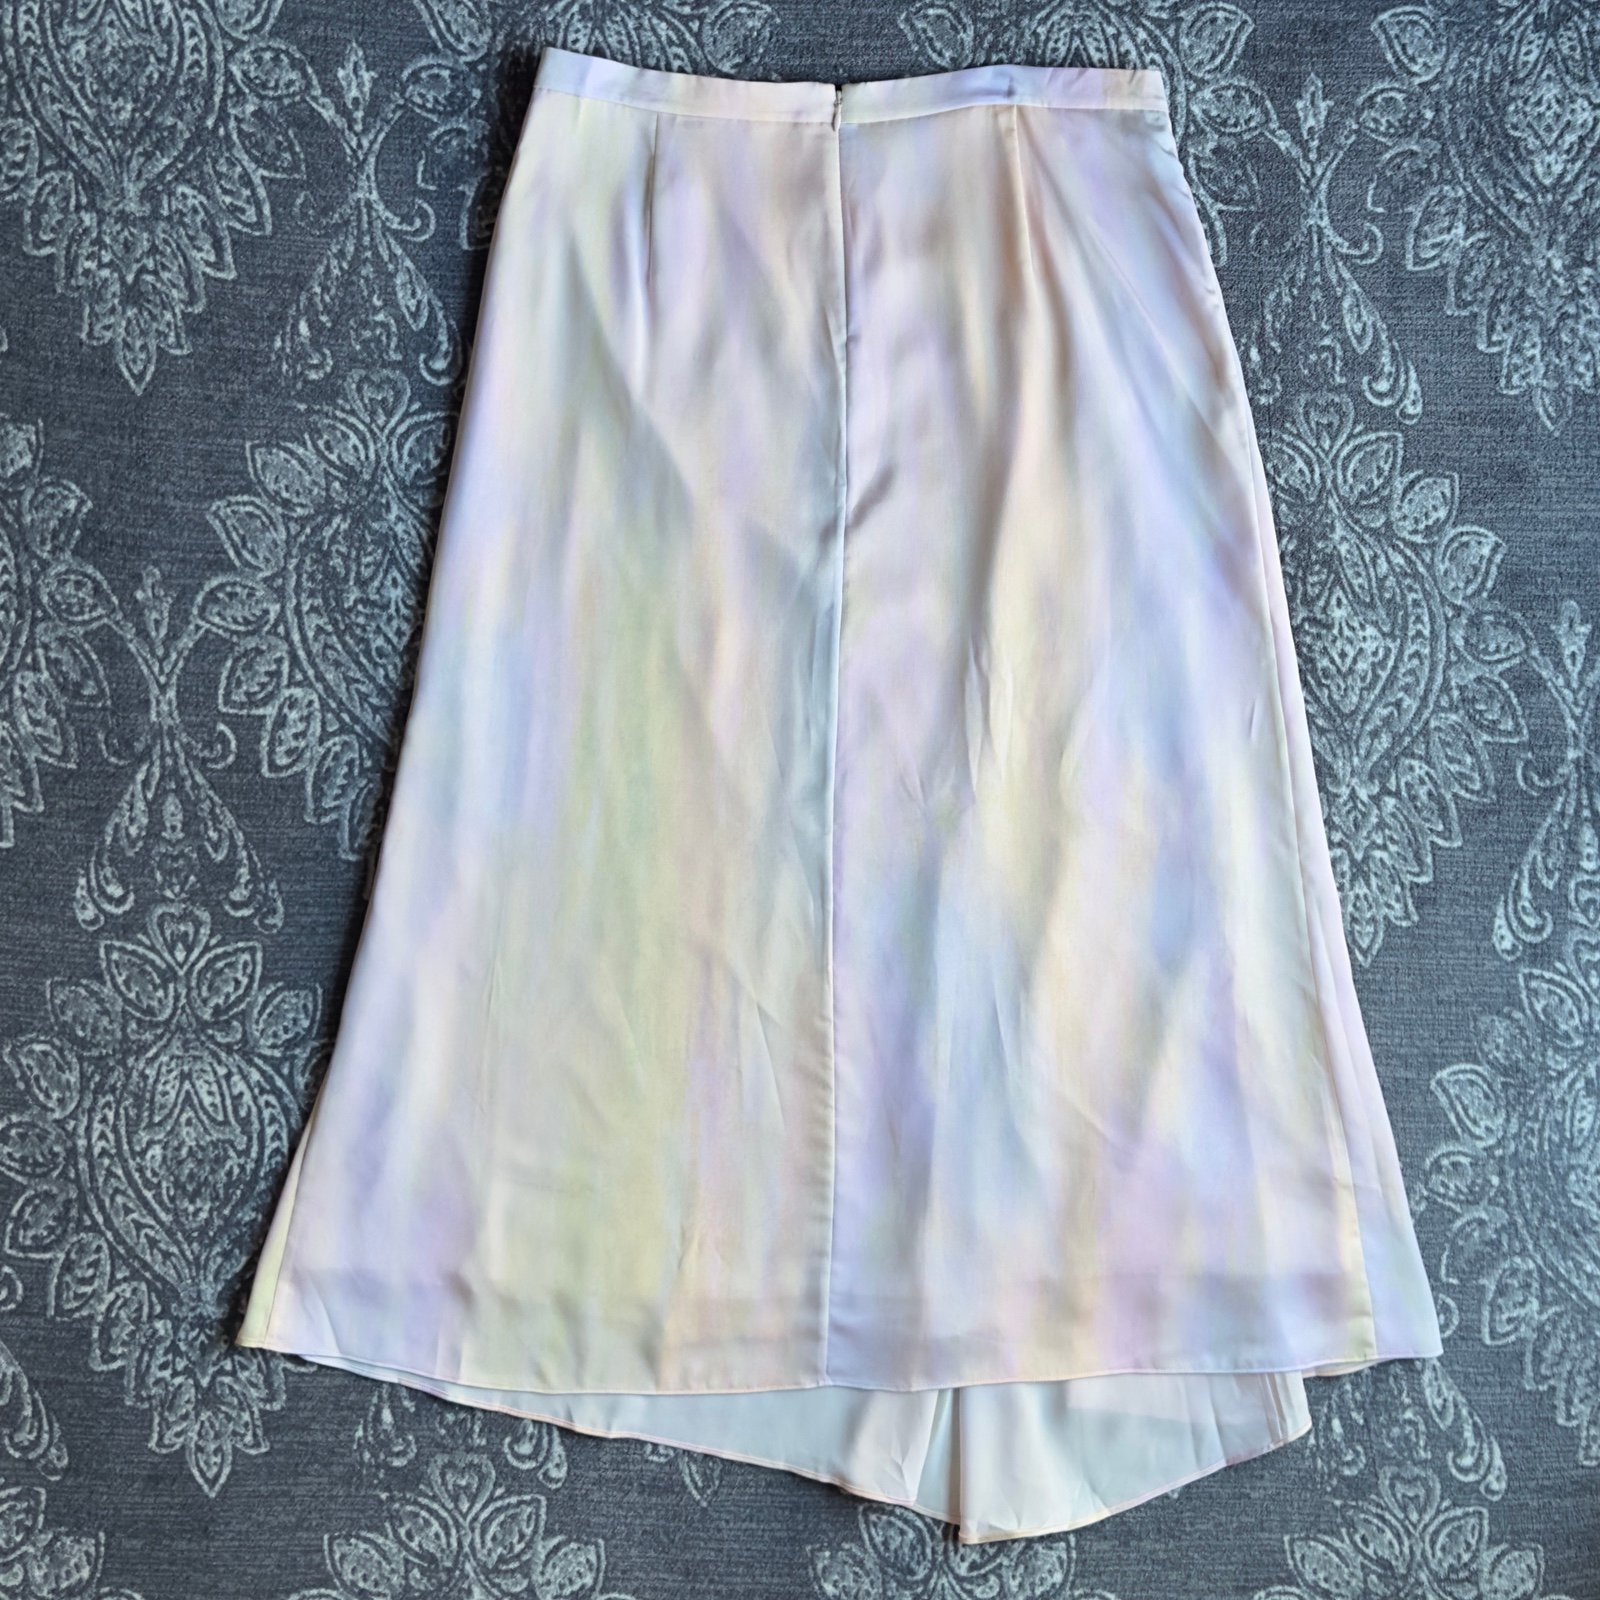 Exclusive Vince Rainbow Wash Drape Skirt in Multi Size 10 OxoTfB65P Online Exclusive